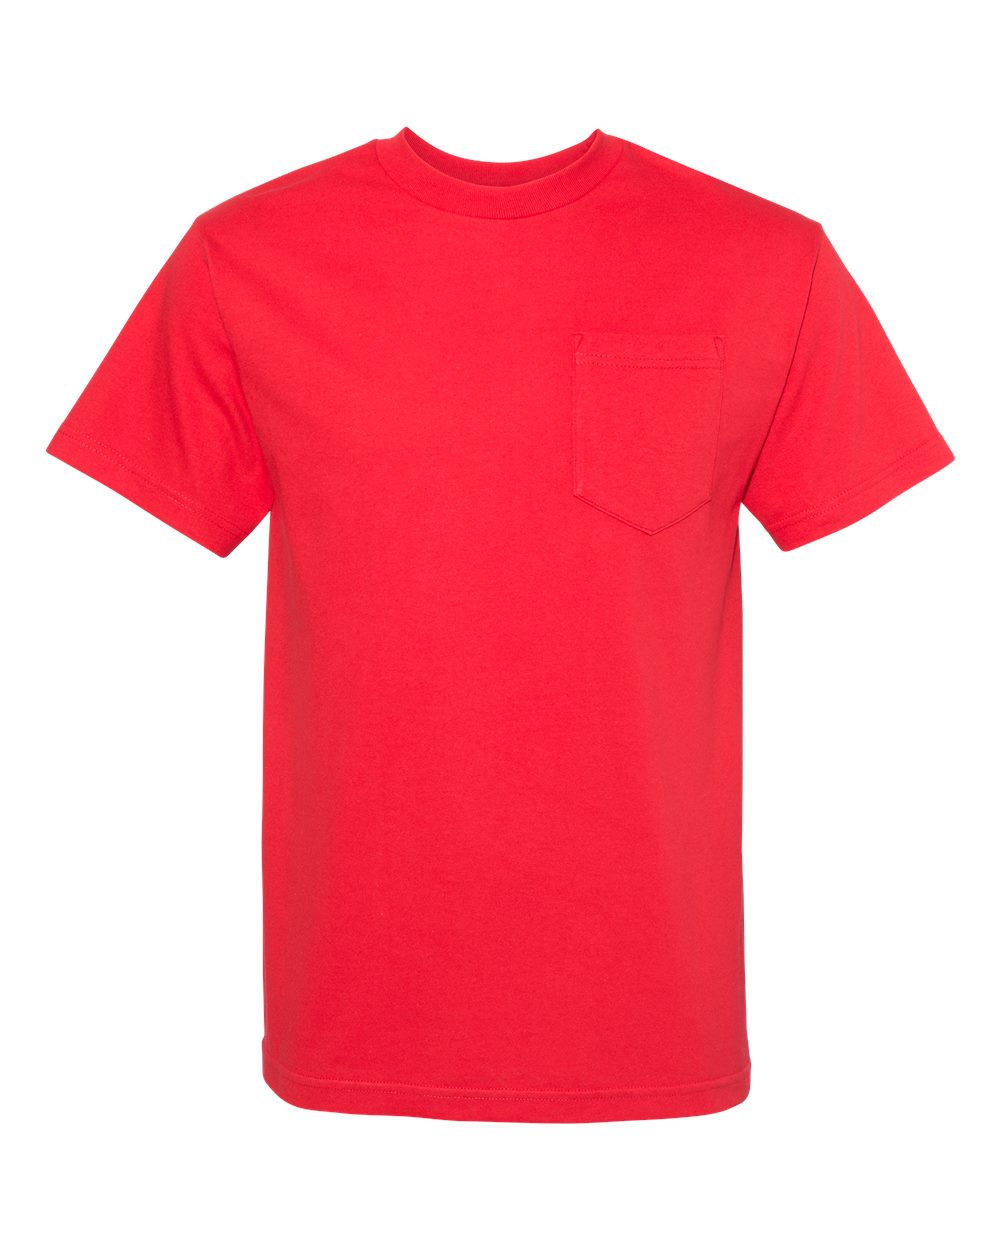 ALSTYLE - Classic Pocket T-Shirt - 1305 - Red - 3X-Large